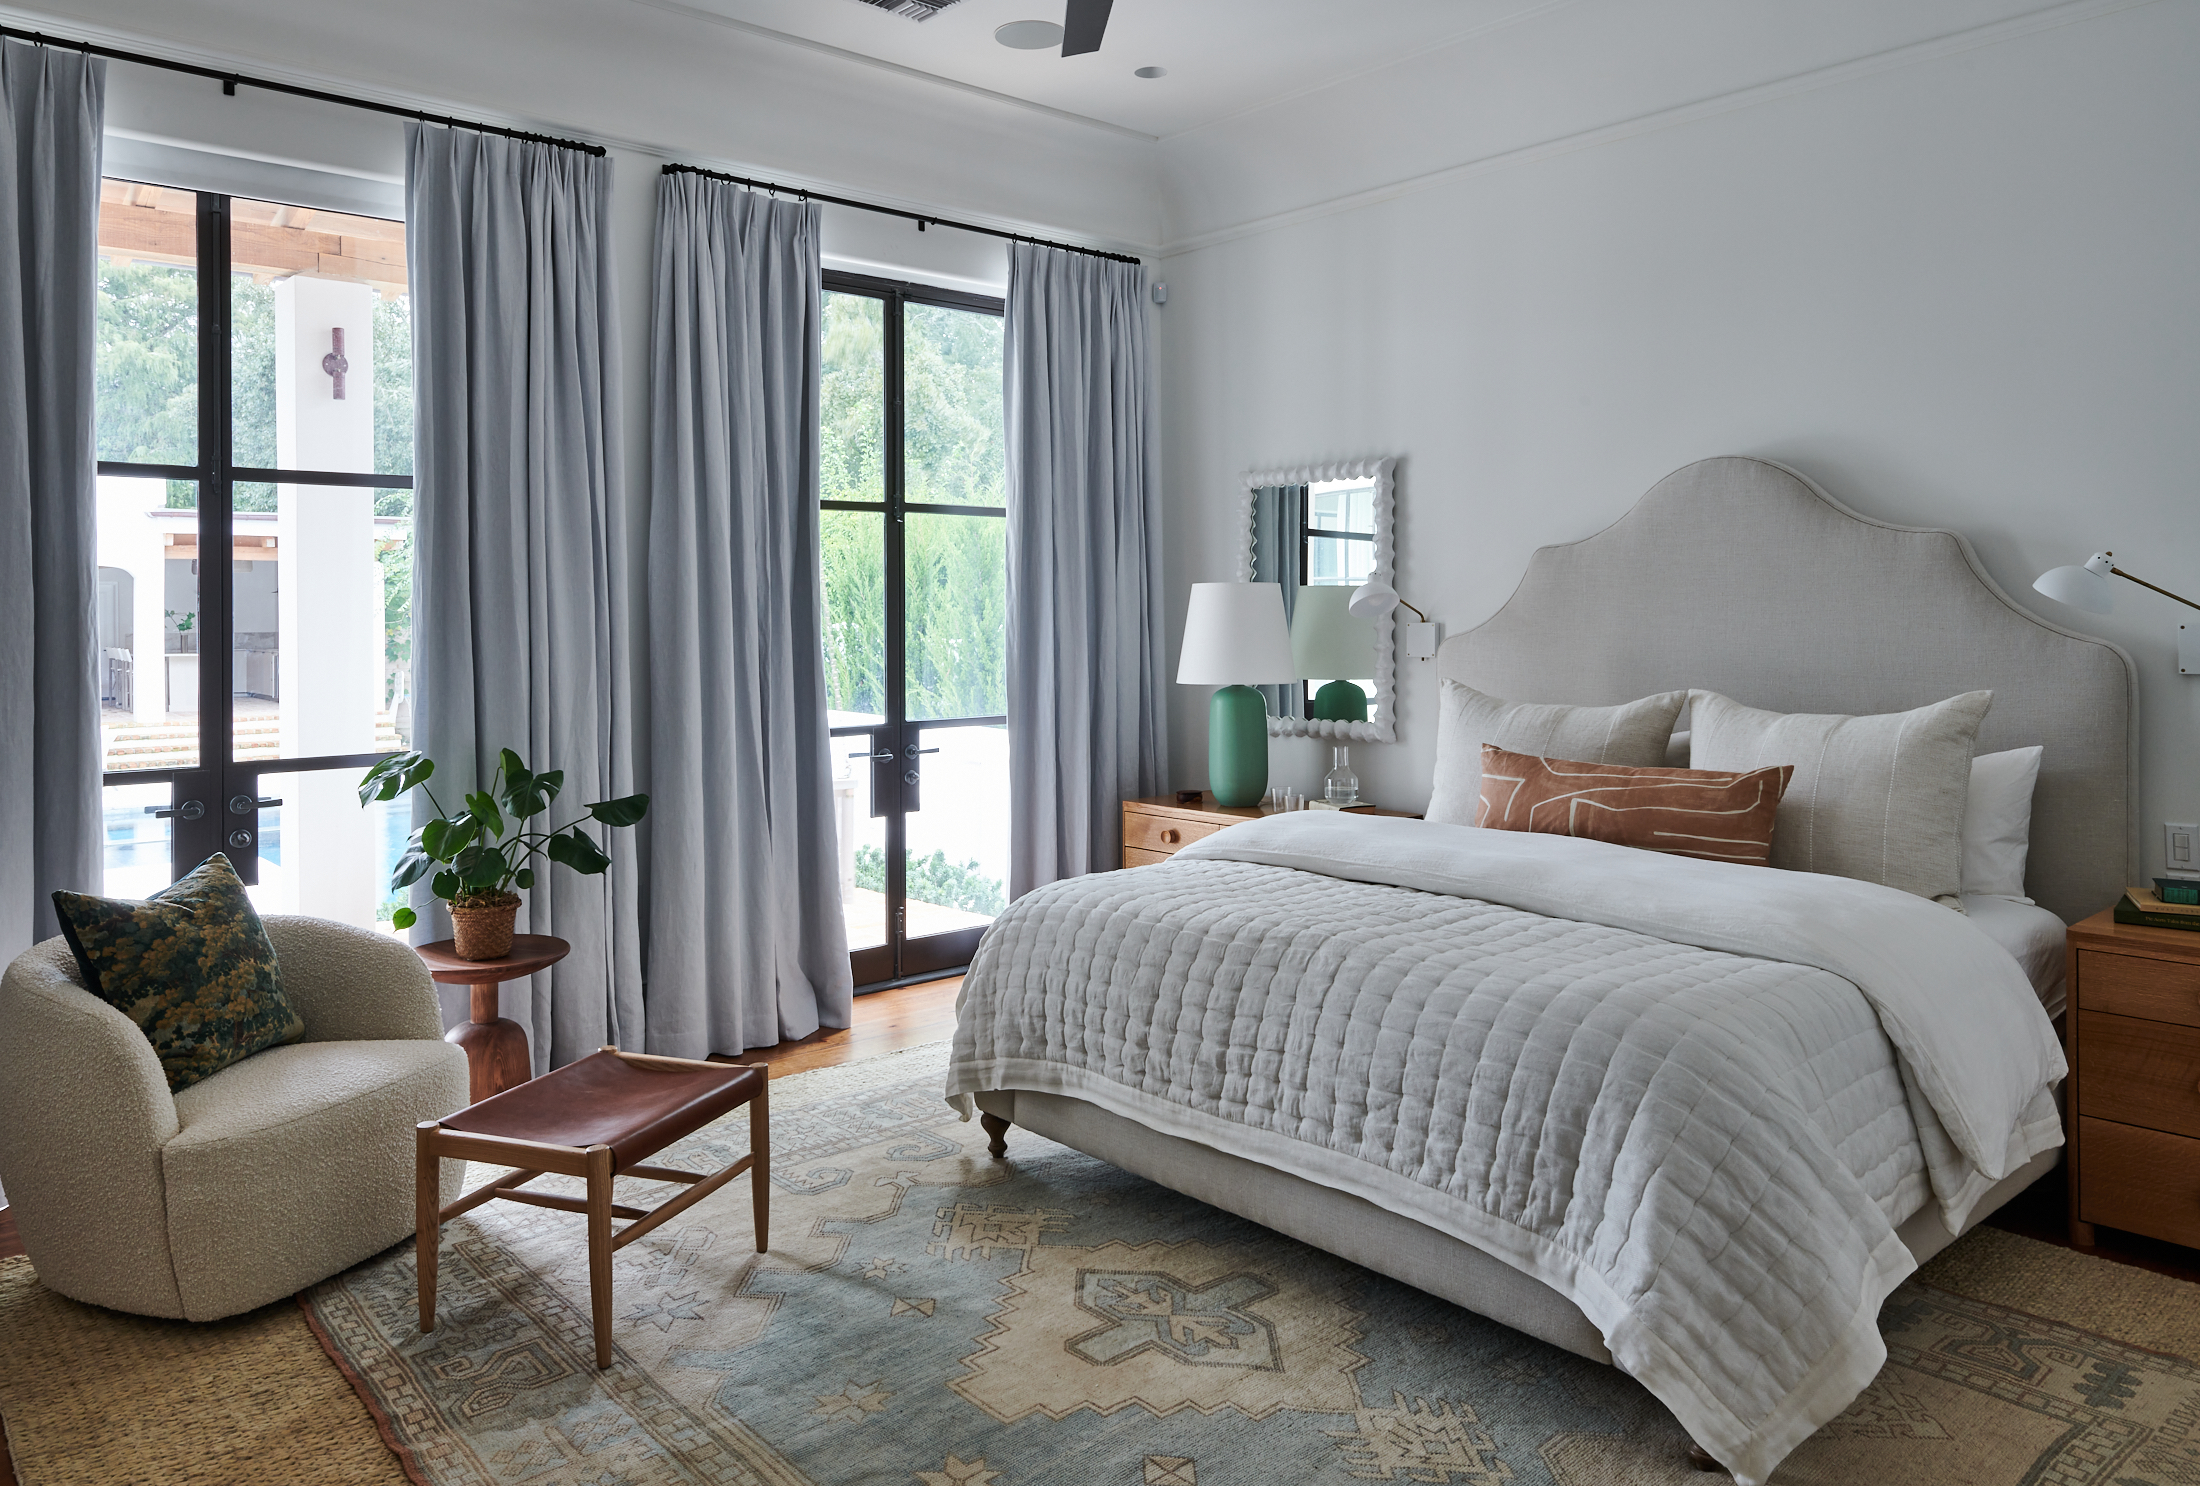 Primary Bedroom by Alison Gootee Photography for Logan Killen Interiors 